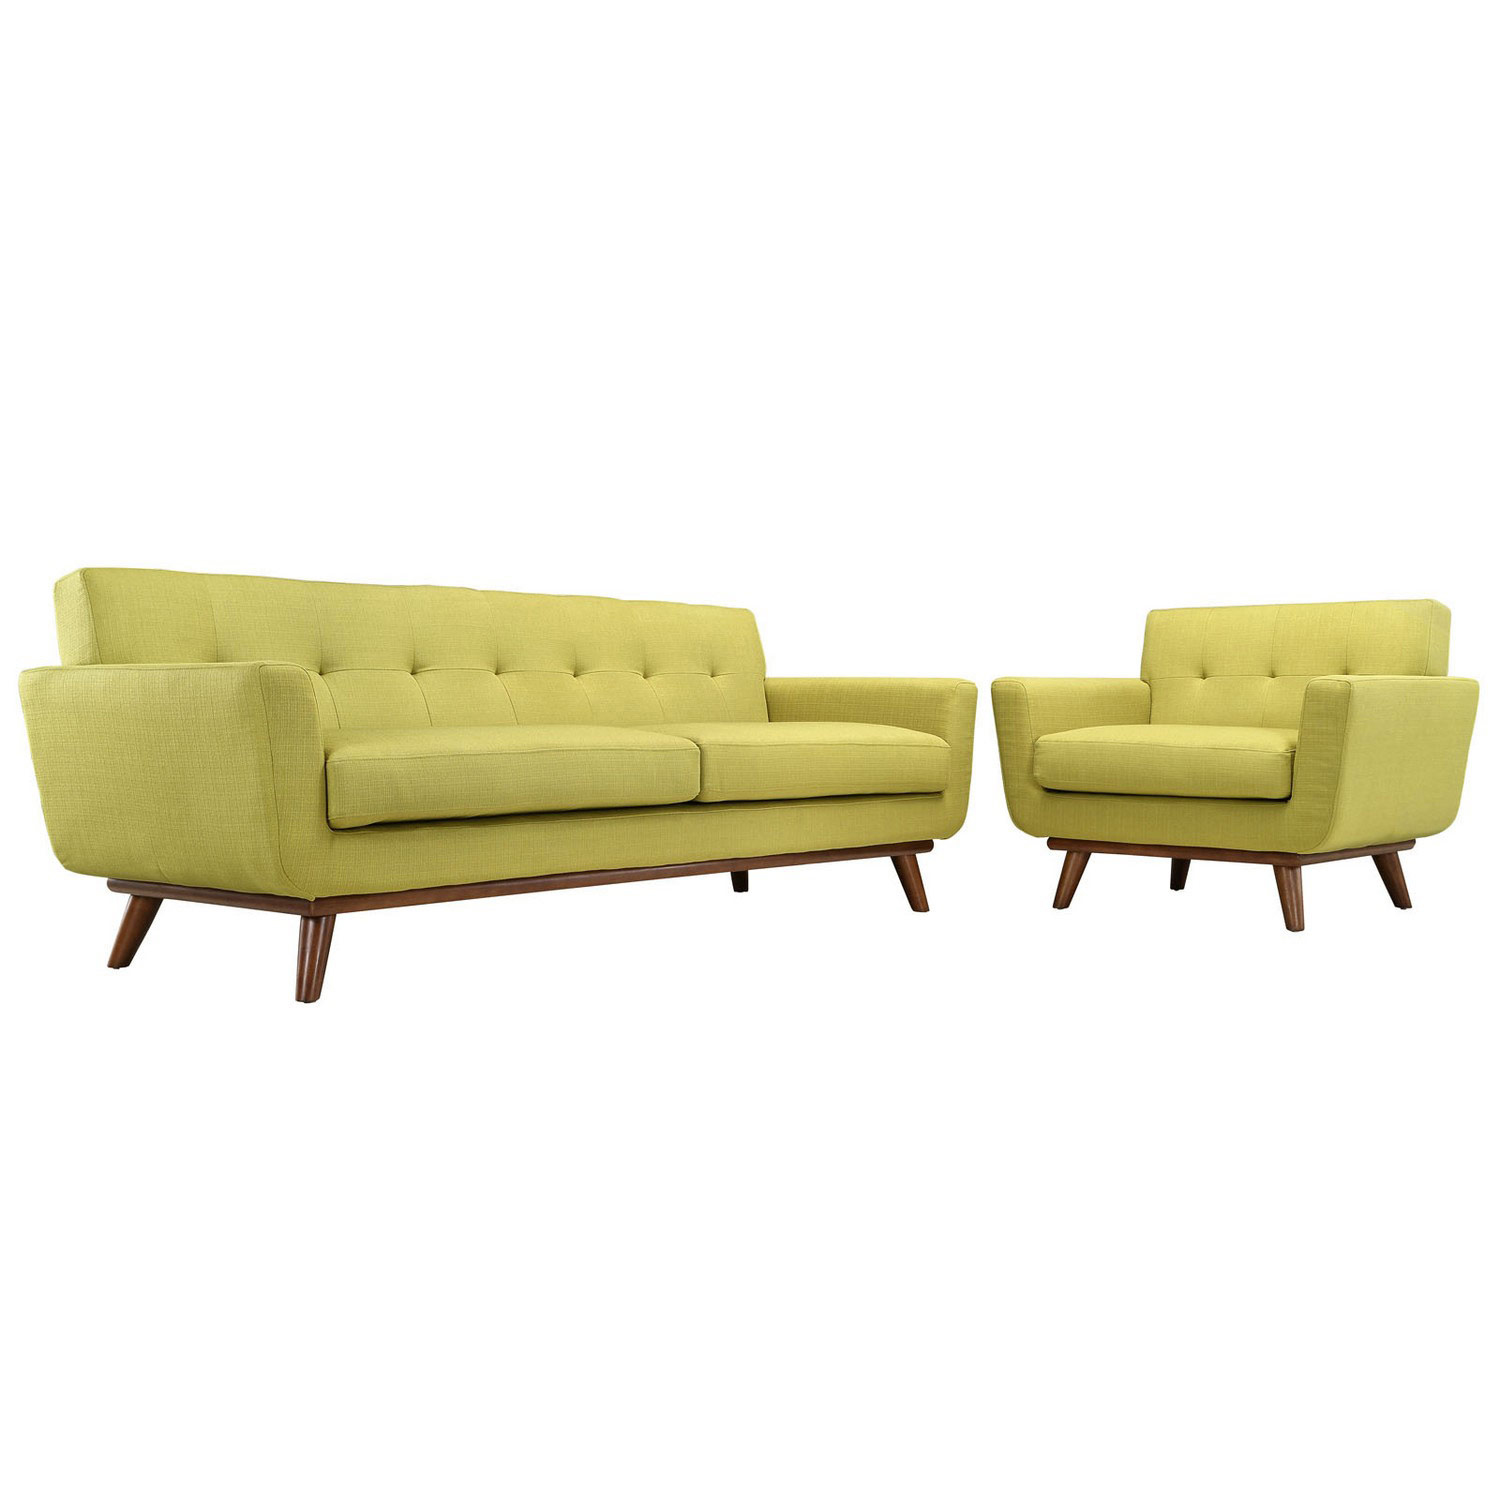 Modway Engage Armchair and Sofa Set of 2 - Wheatgrass